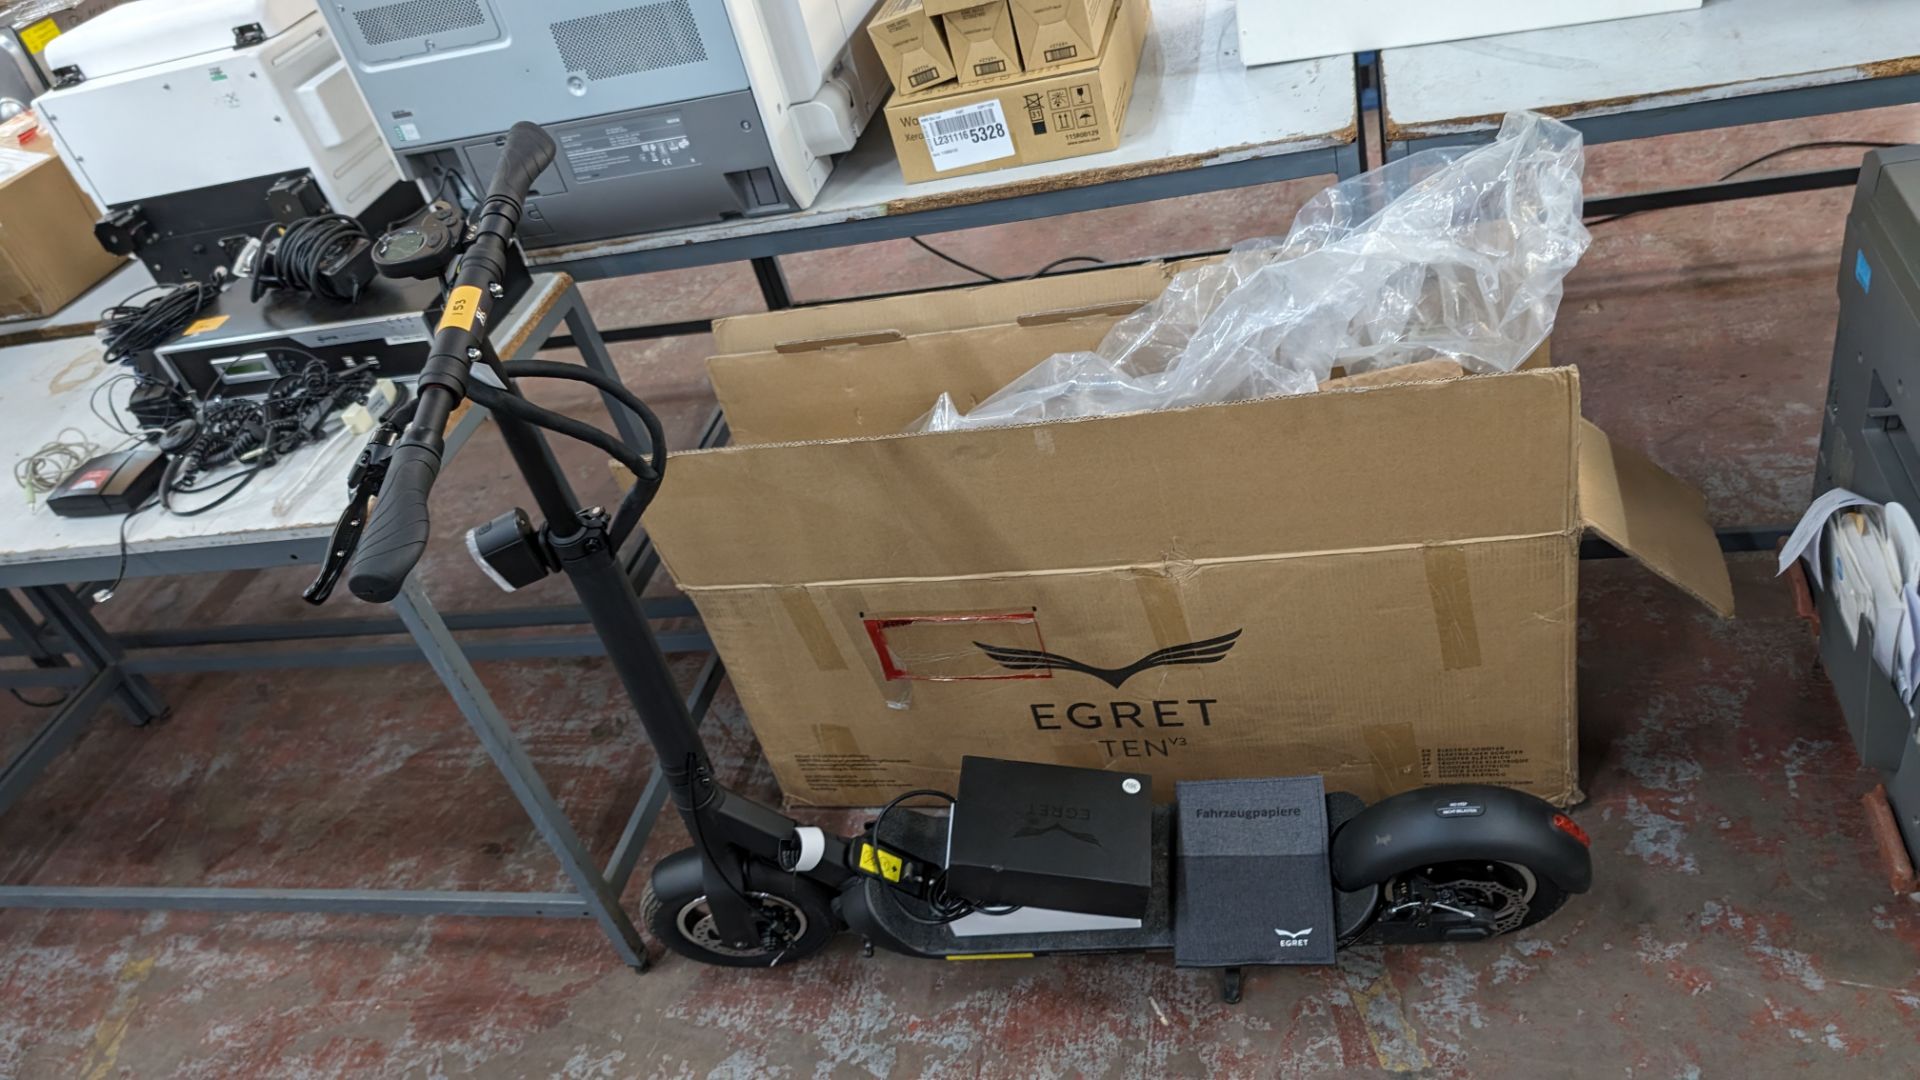 Egret TEN V3 36V electric scooter - this item appears to be new & unused - the box was sealed until